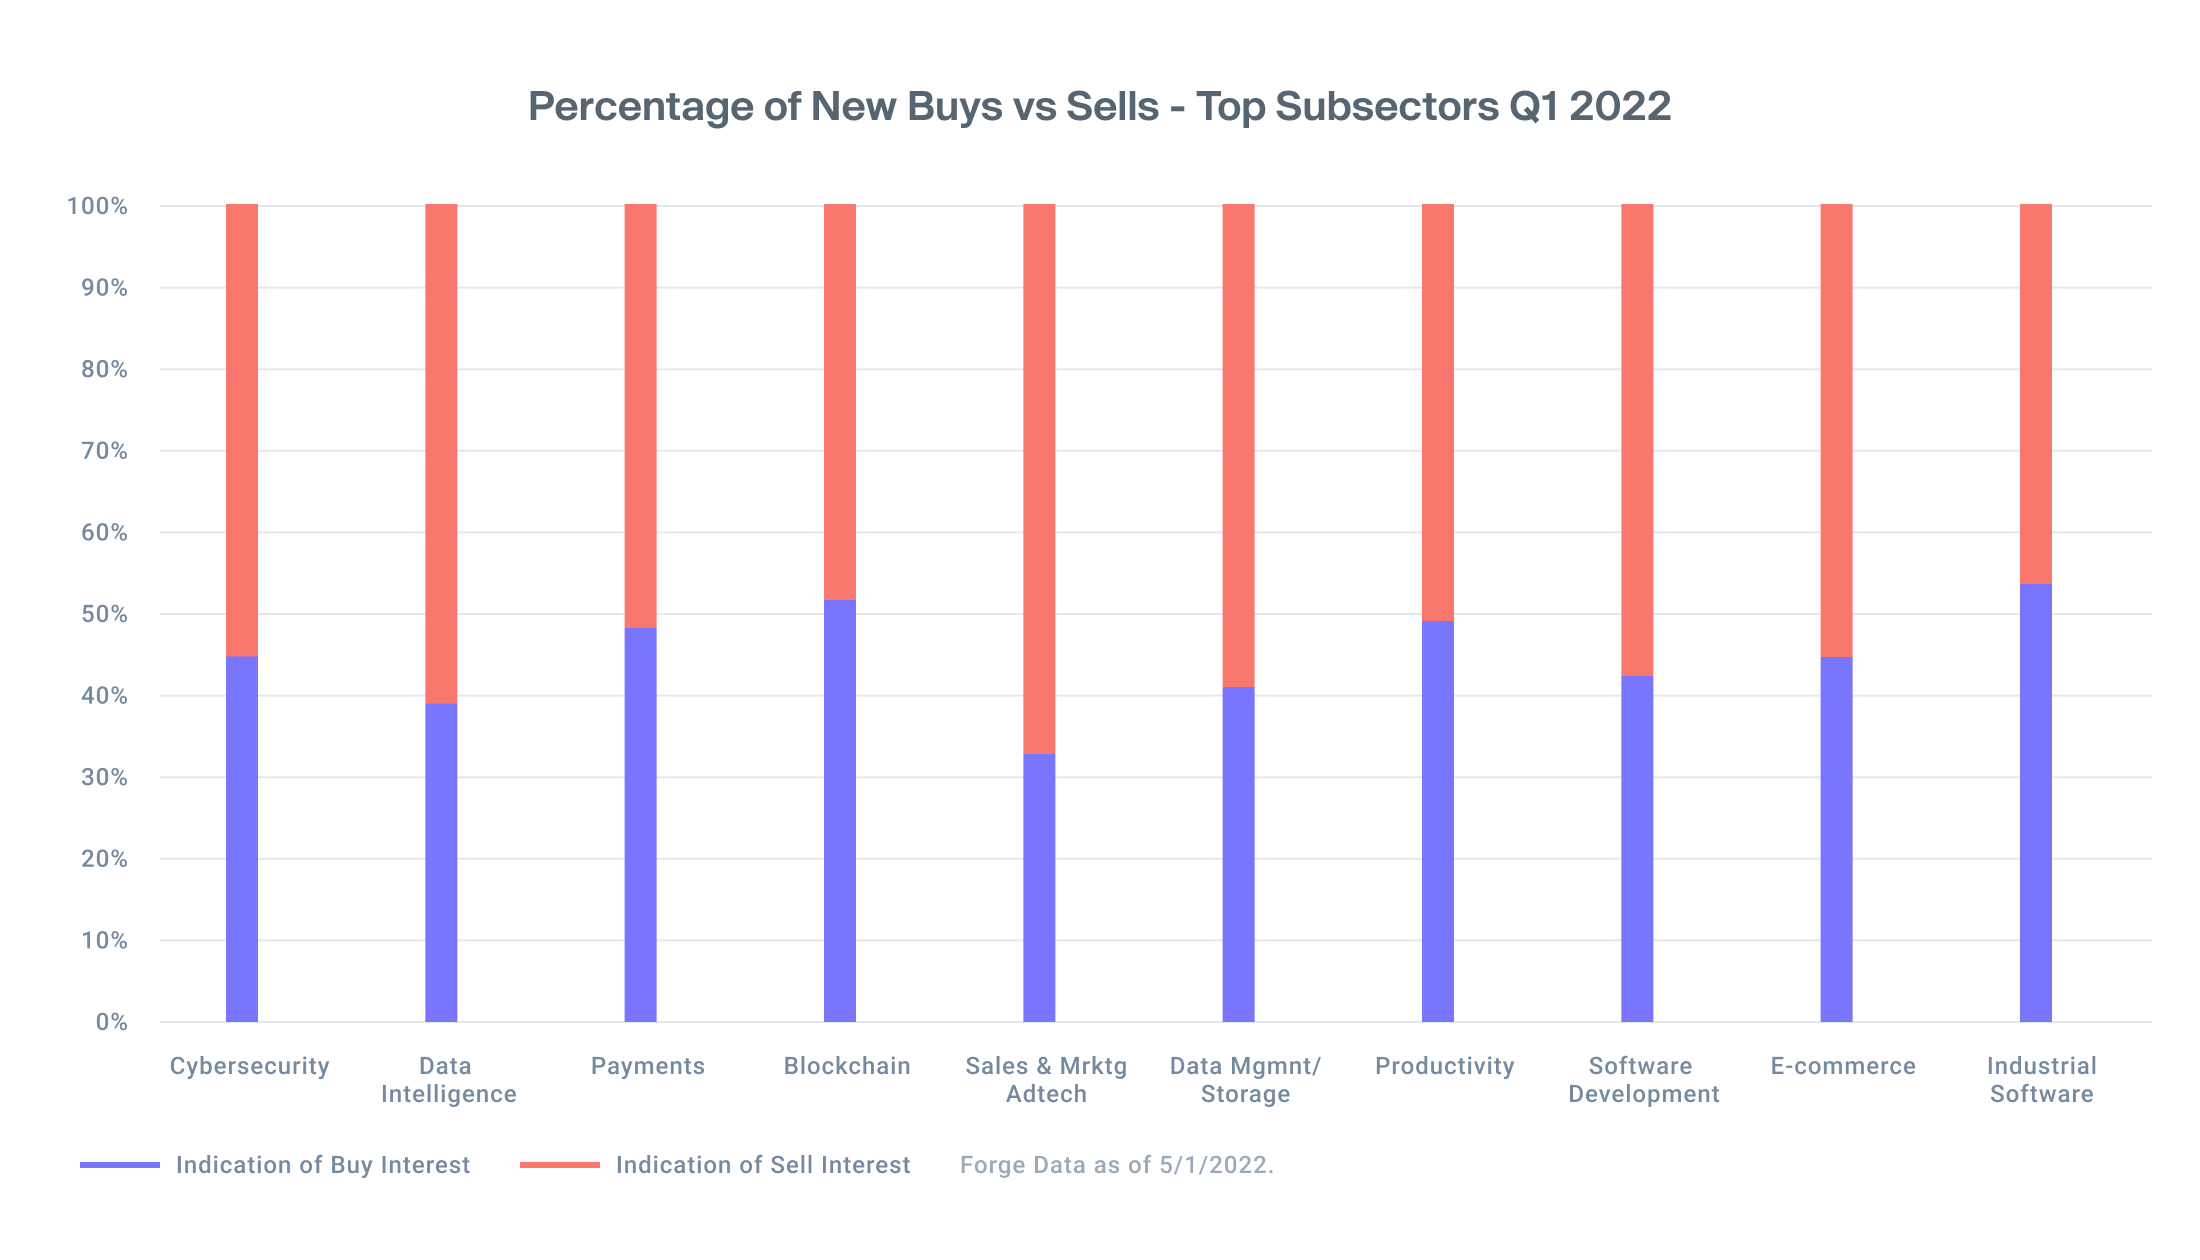 Bar chart shows that most of the sell-side indication of interest are coming from the Sales & Marketing Adtech subsector